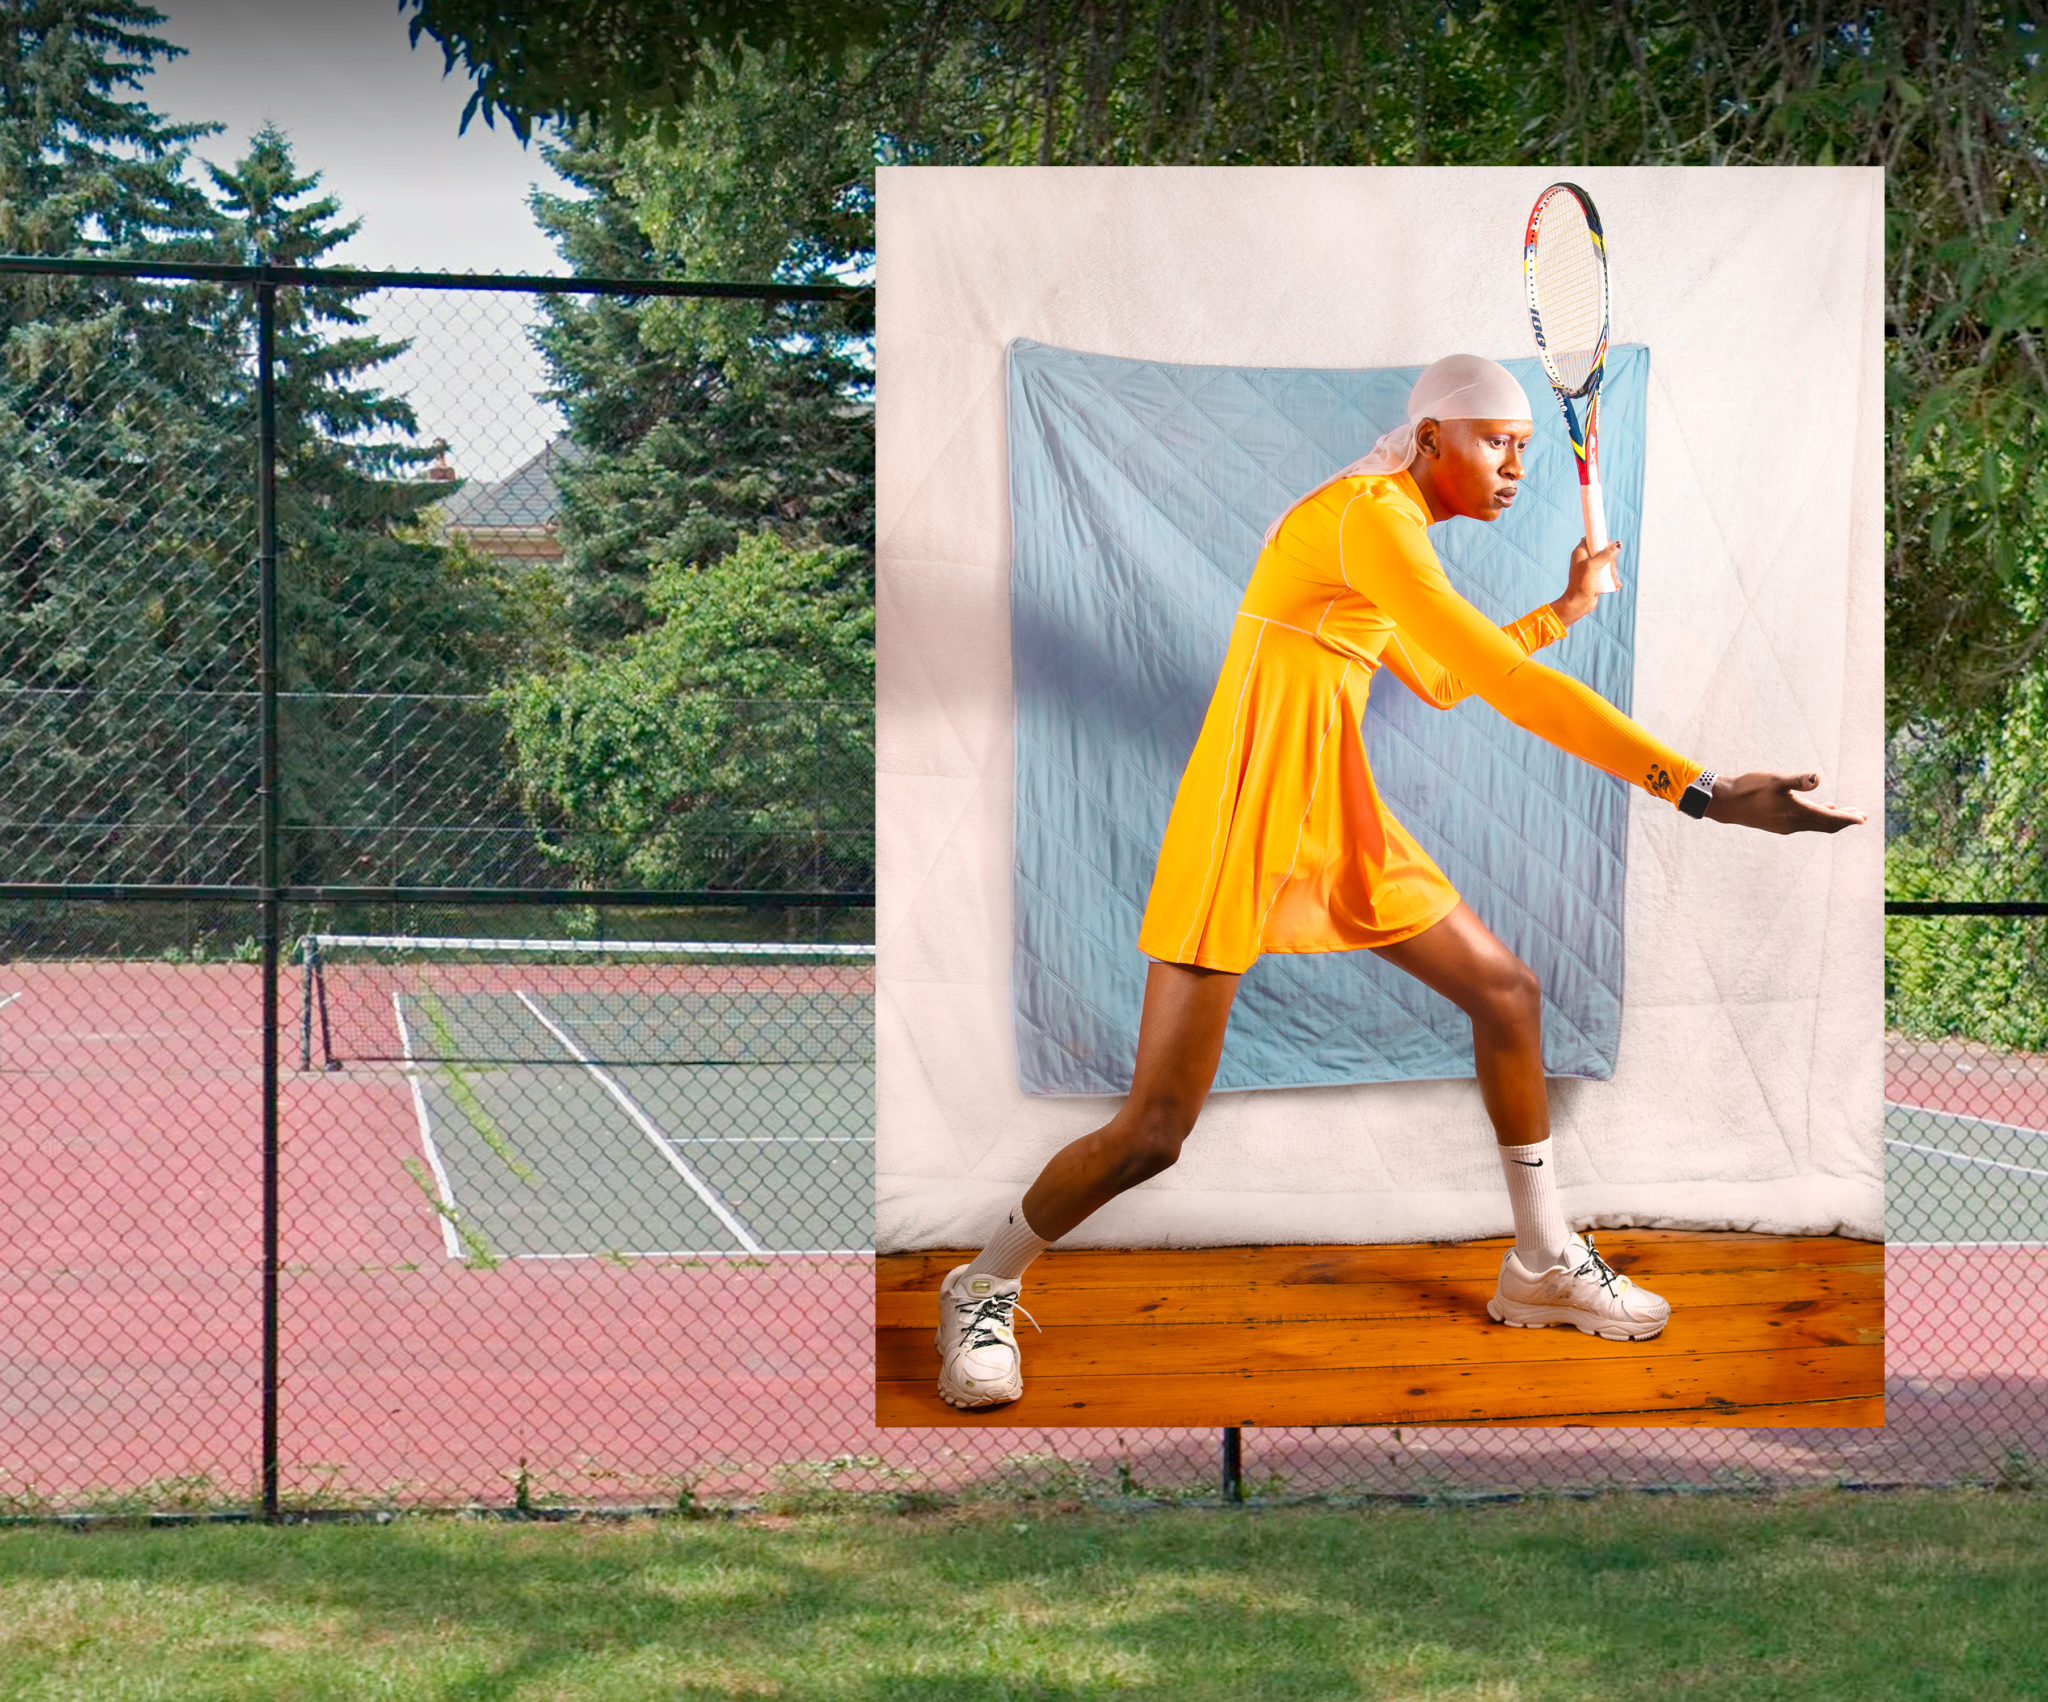 "I just want to wear my orange dress to the tennis courts & come back home unbothered," 2020, Jamaica Plain, MA